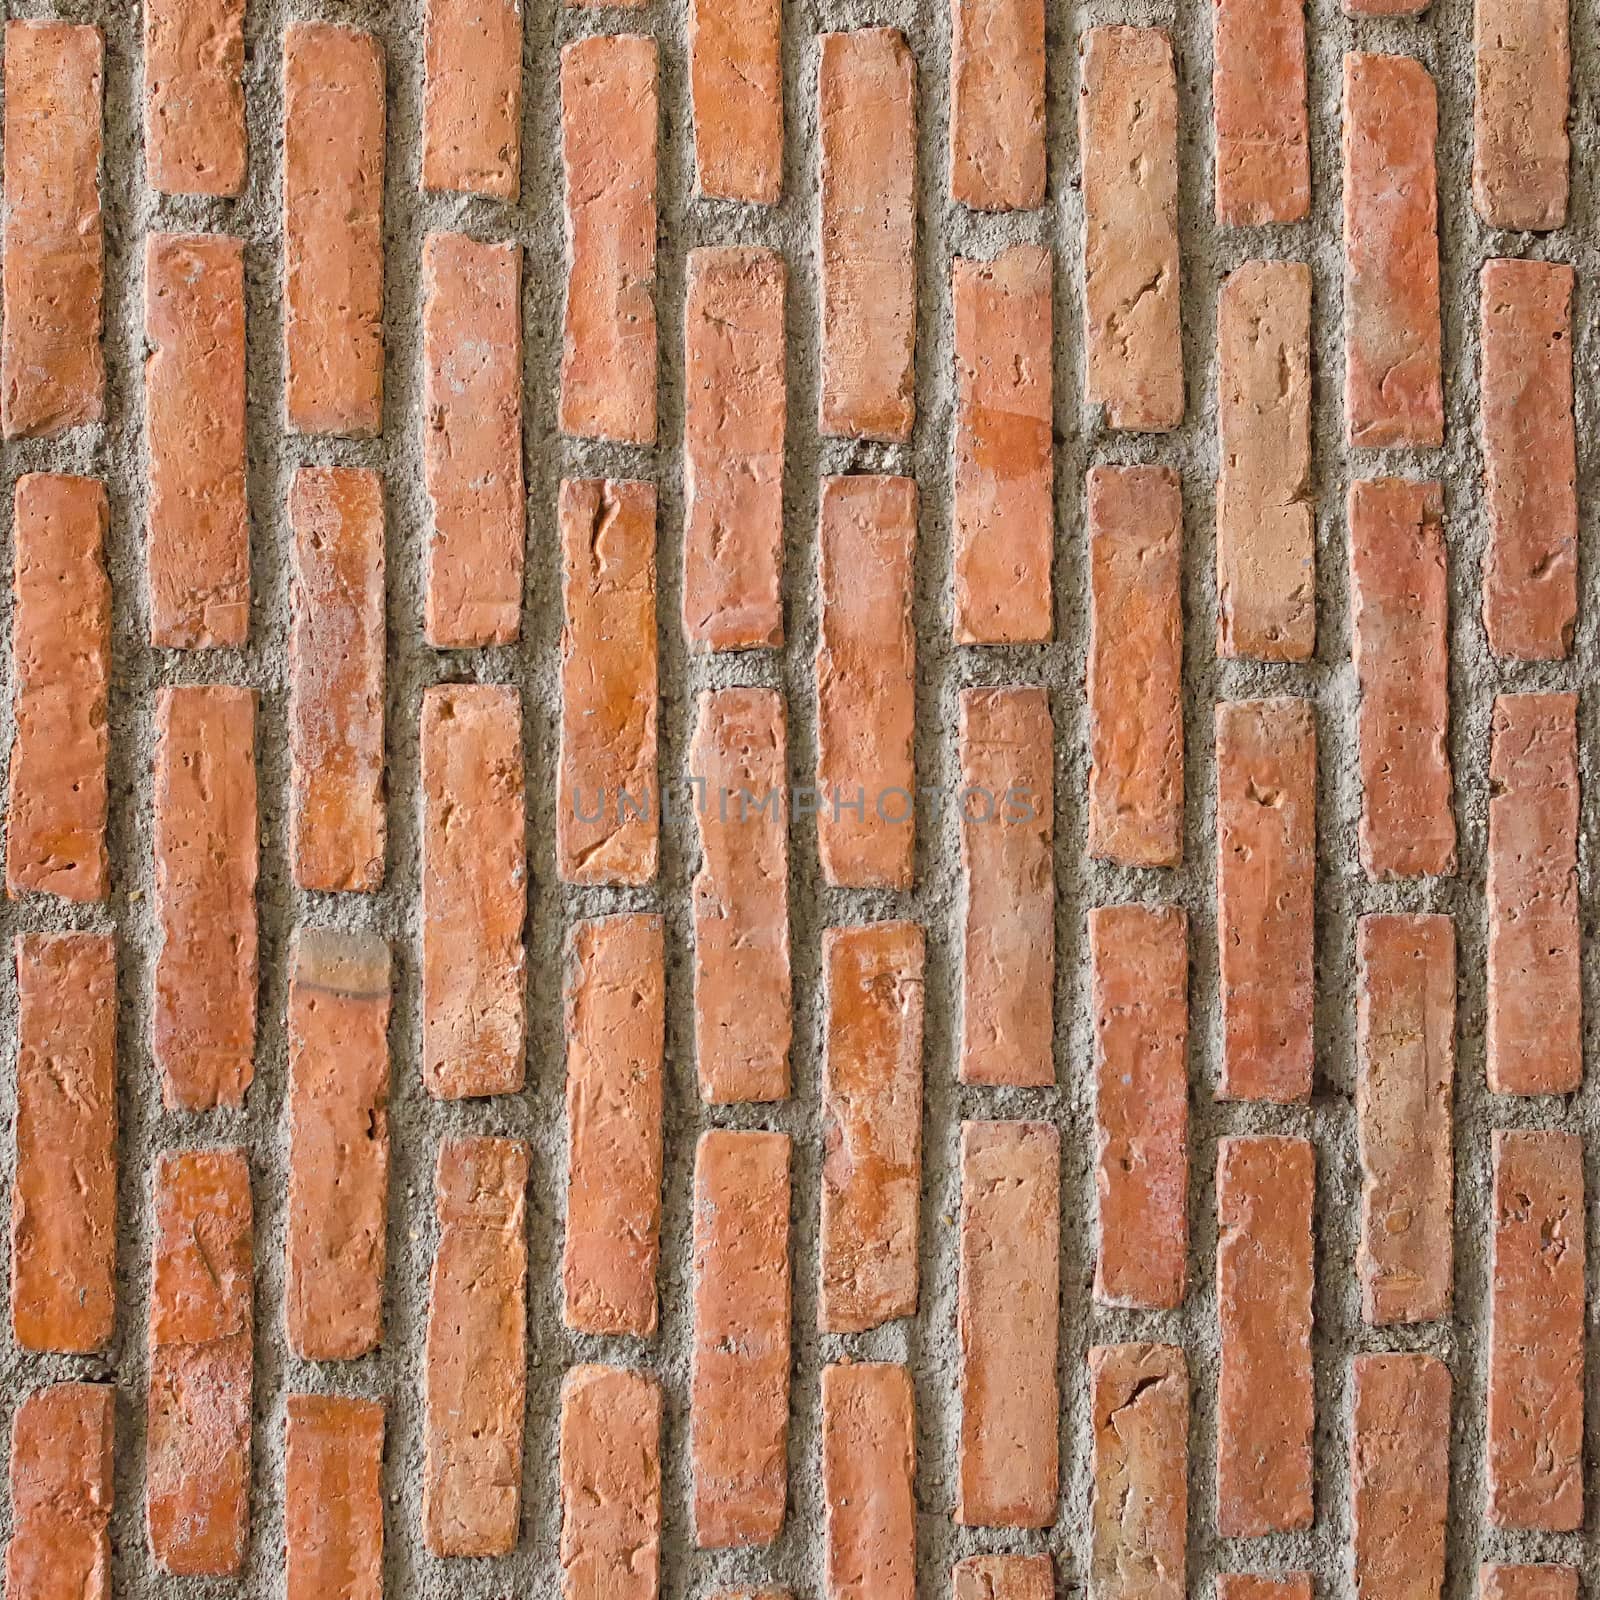 Background of brick wall texture by nopparats